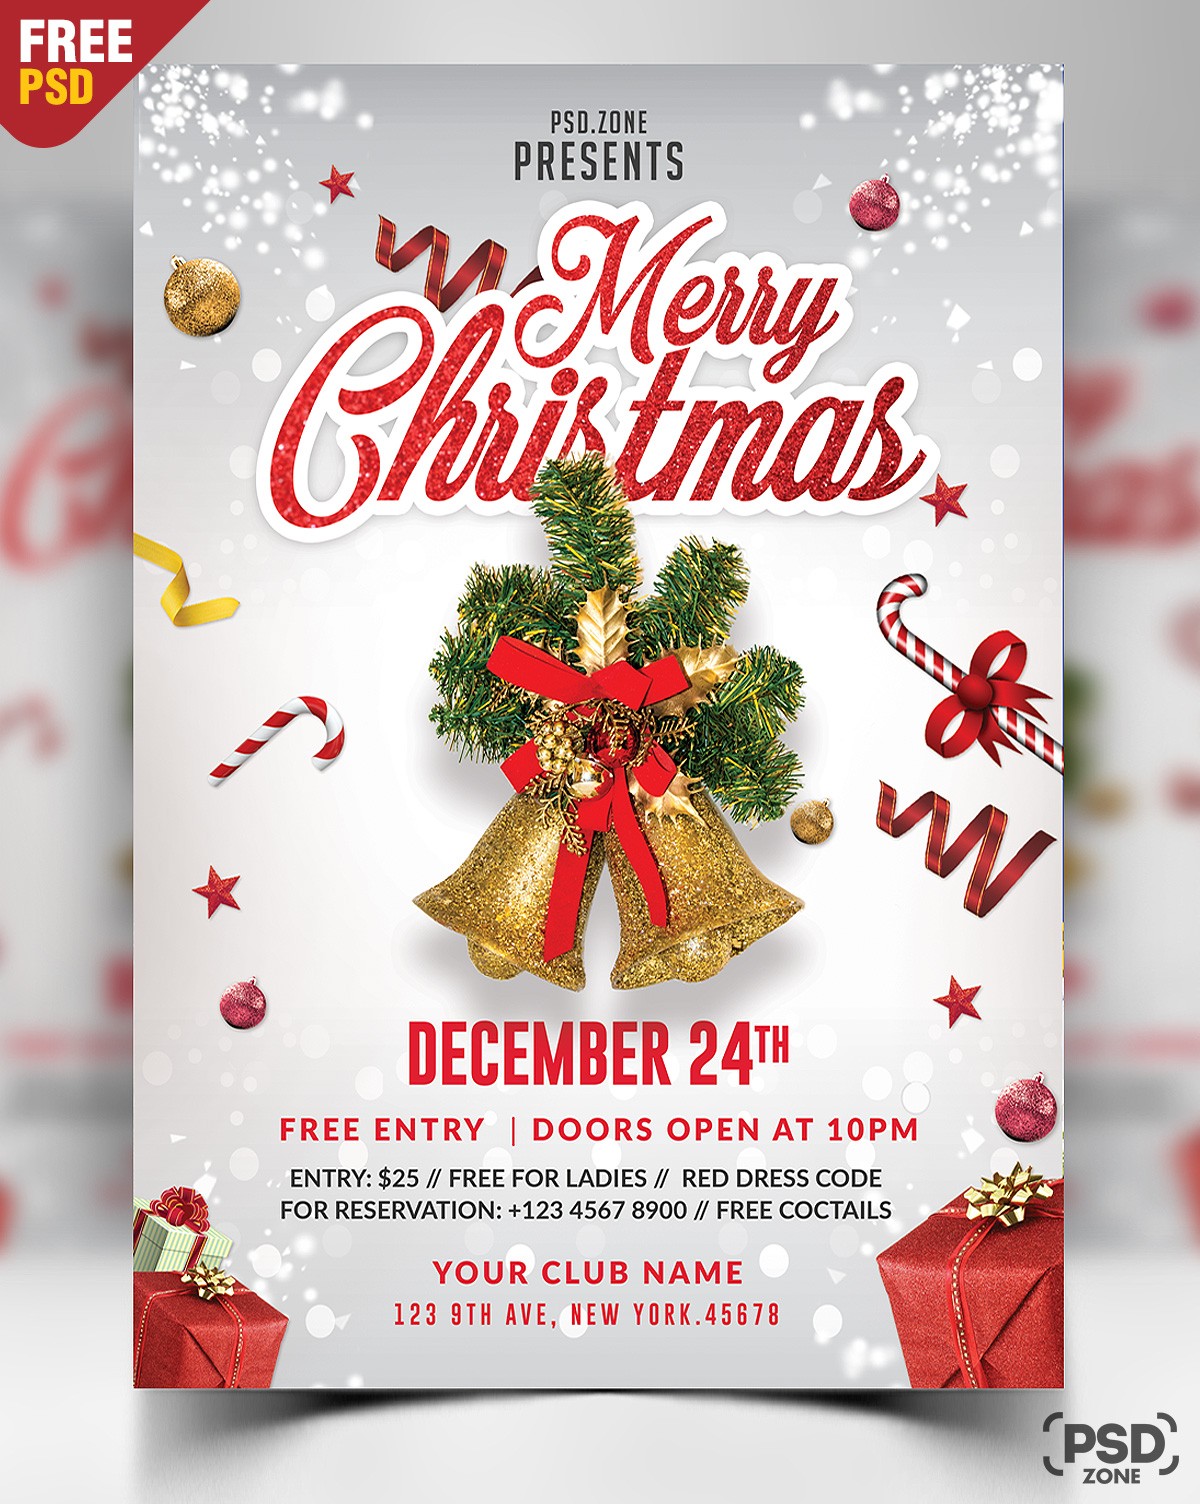 Merry Christmas Flyer Free PSD Zone Card